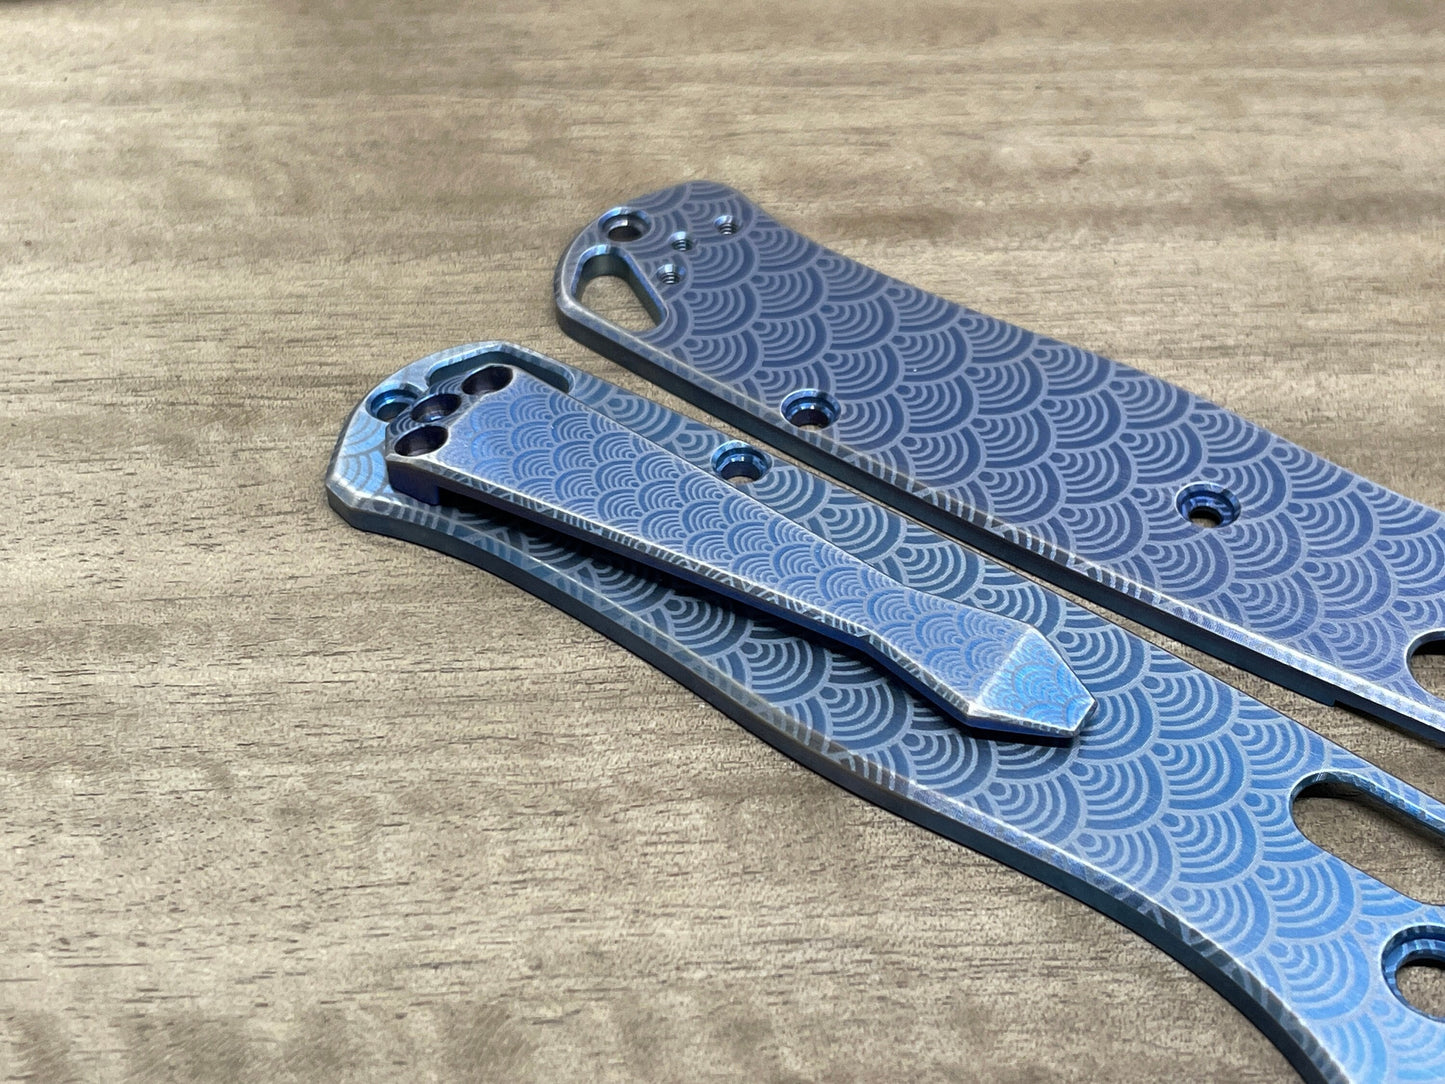 Blue ano SEIGAIHA engraved Brushed Dmd Titanium CLIP for most Benchmade models